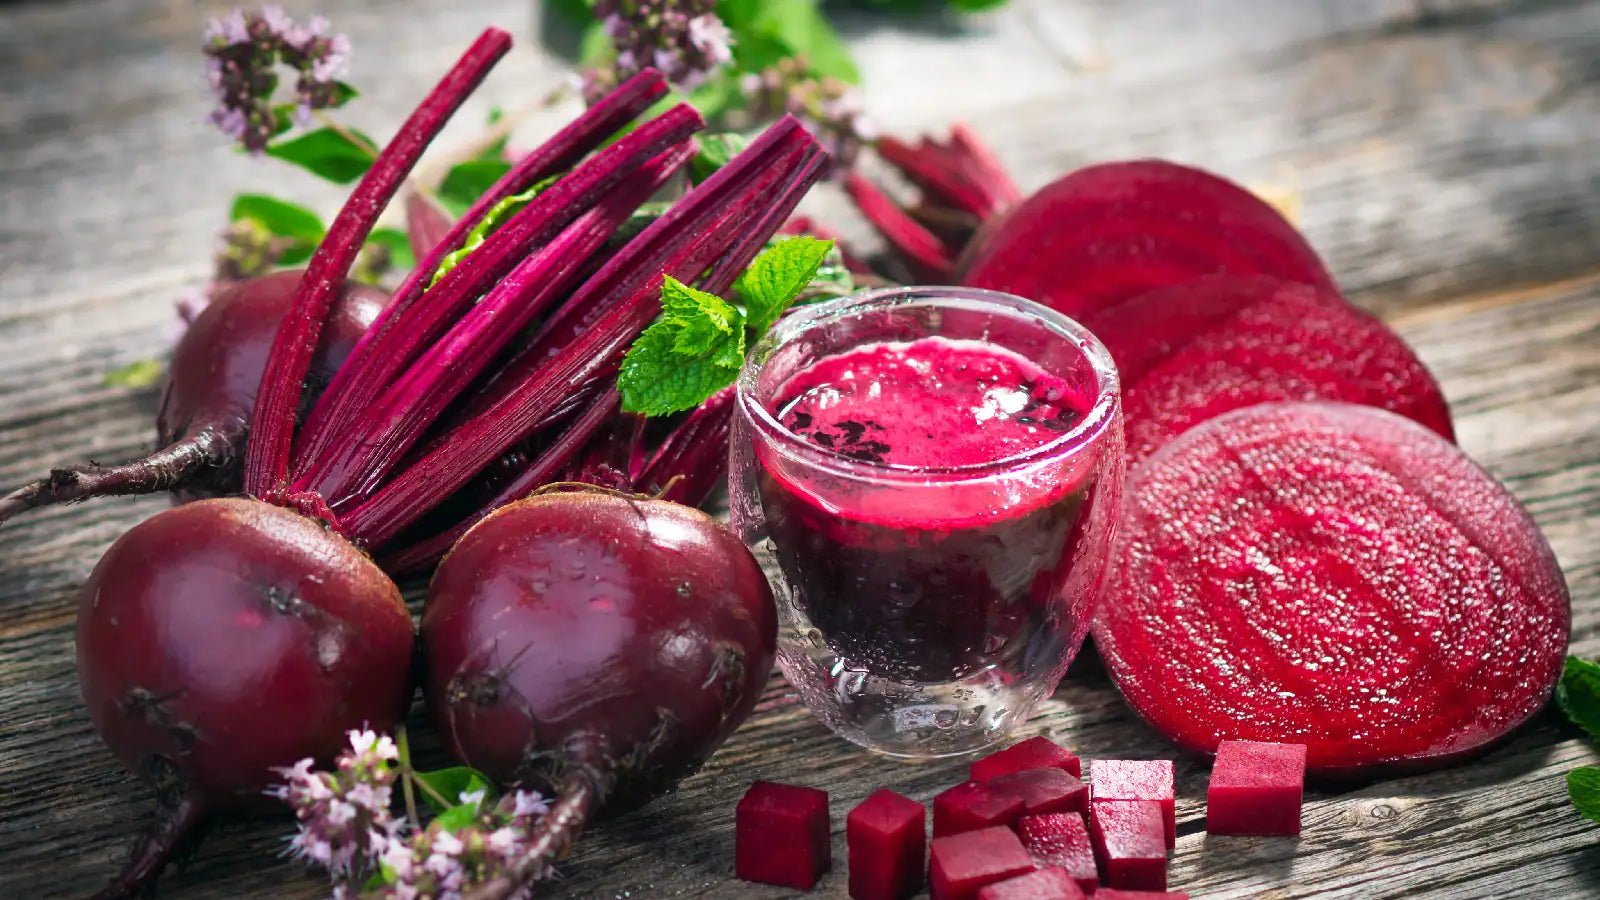 Beets: The Natural Superfood with Diuretic Properties - 120/Life